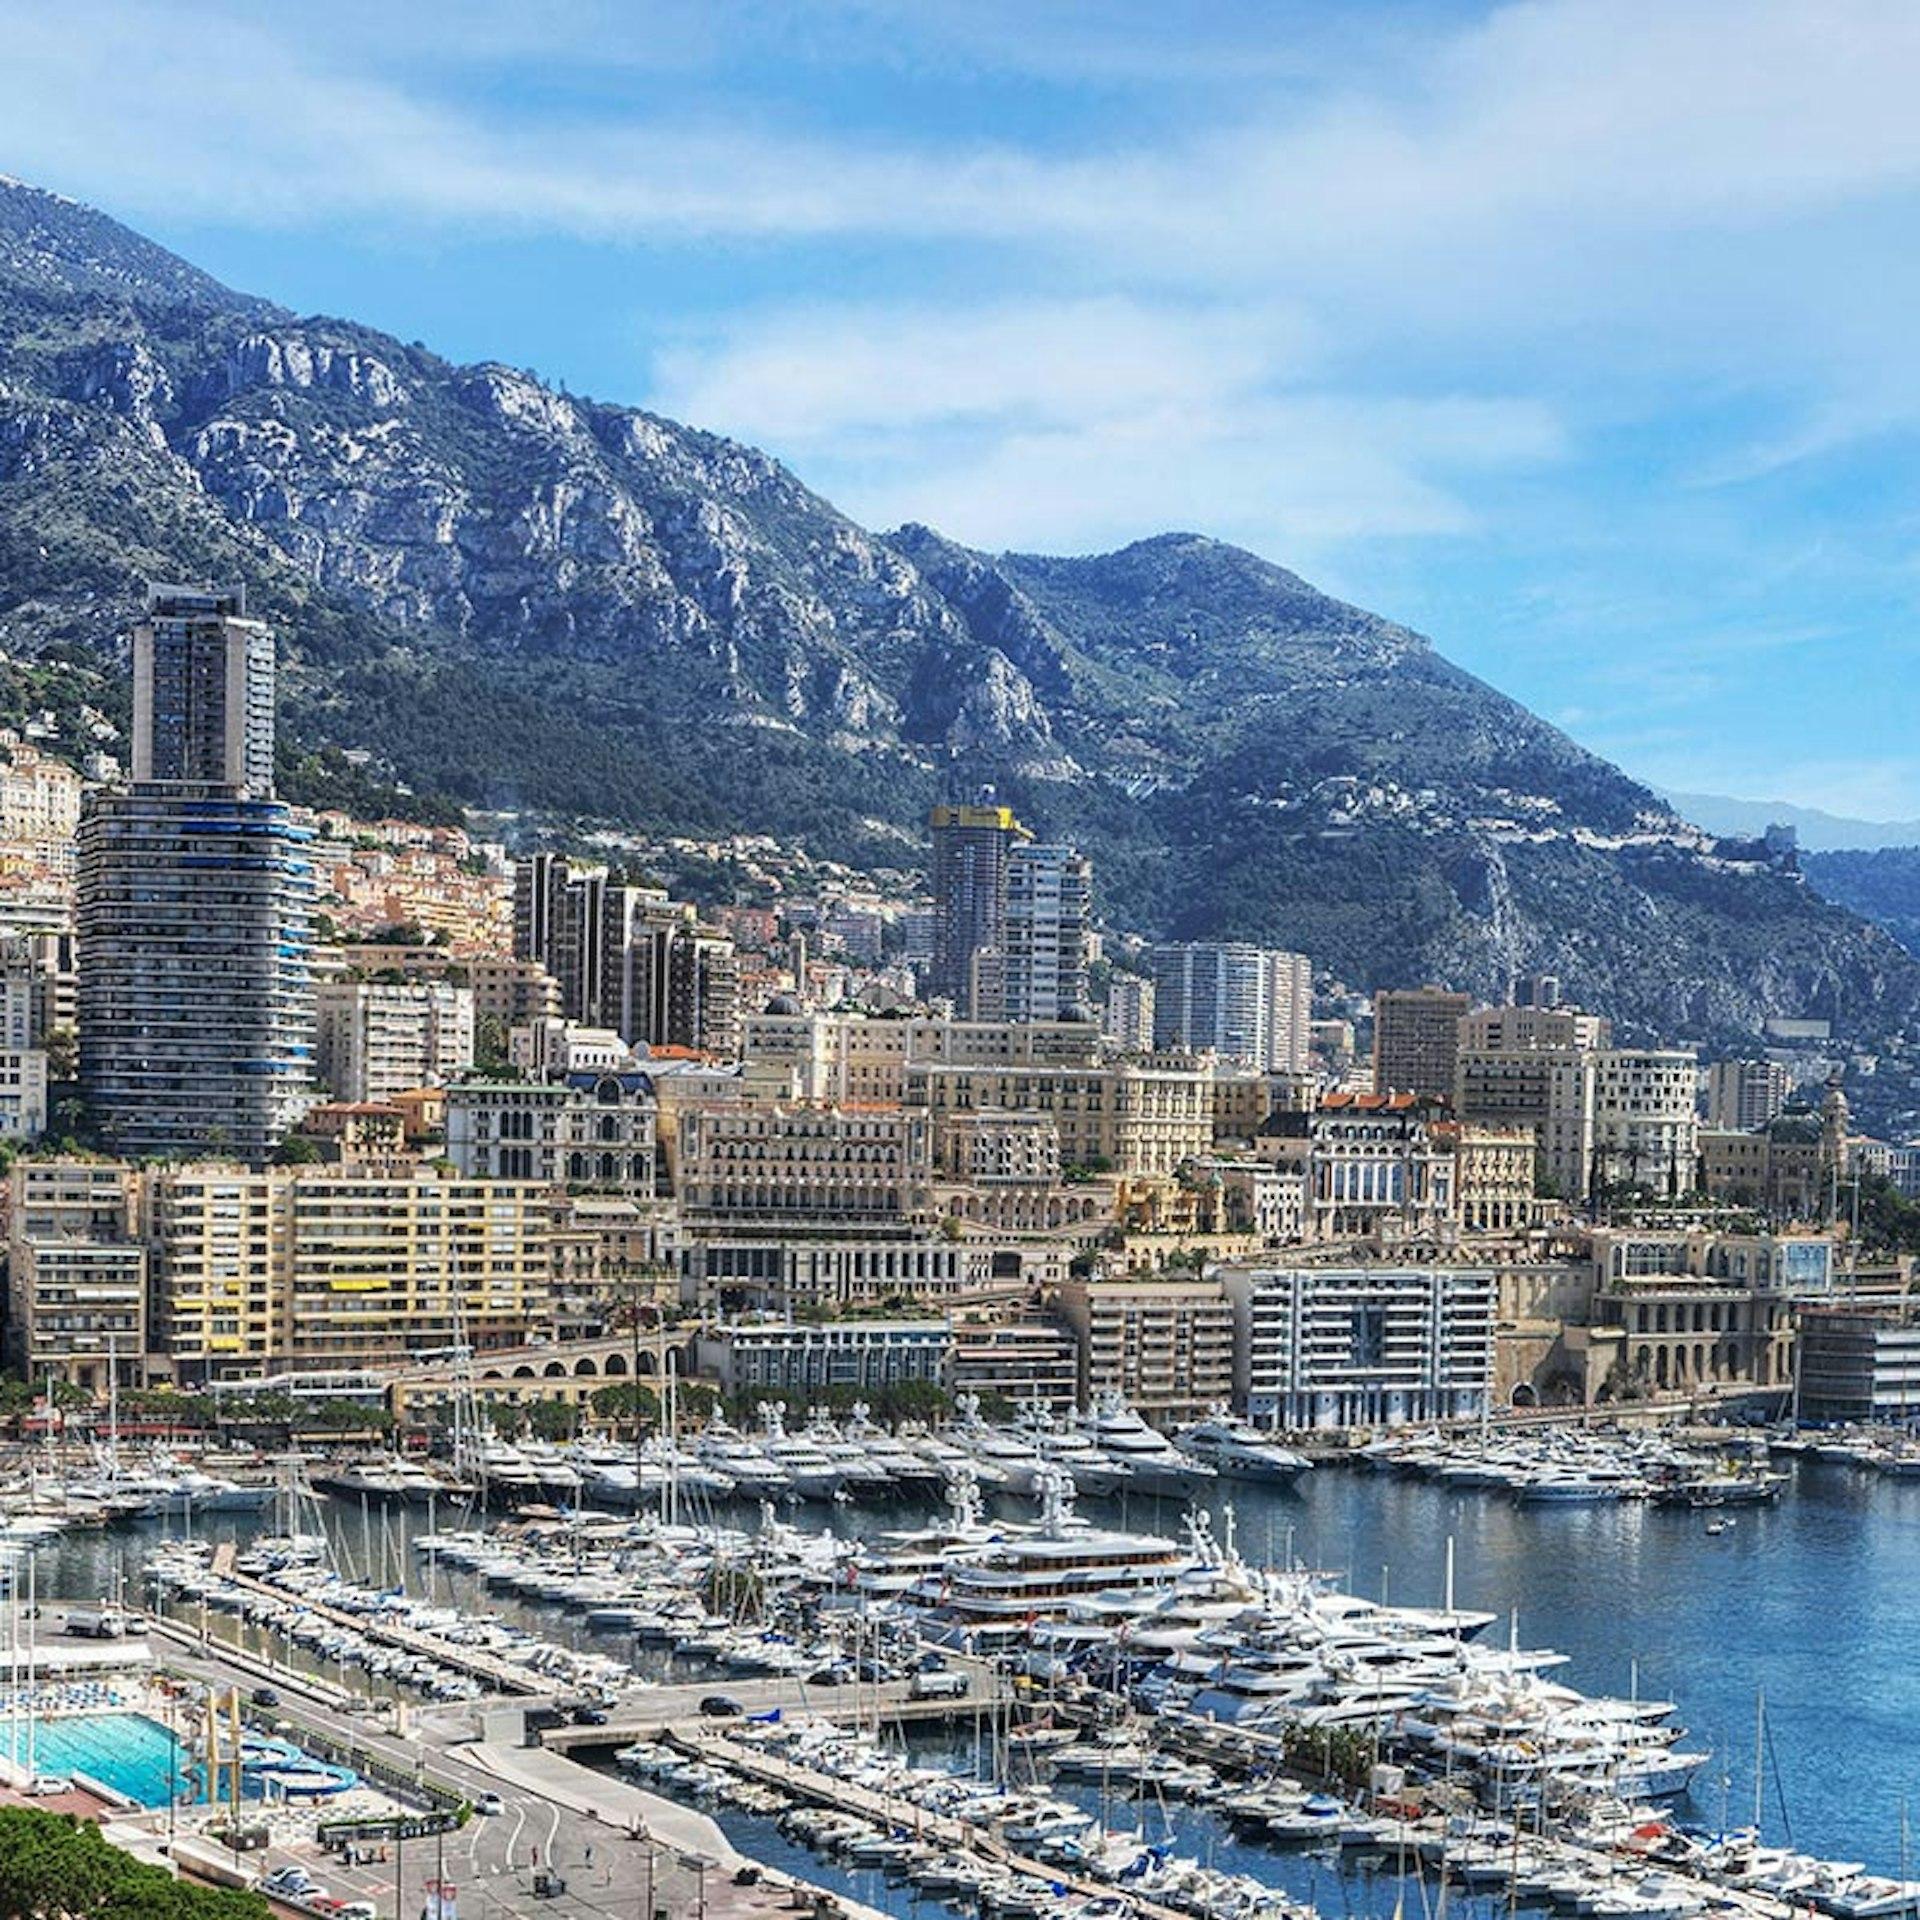 Get the latest news and updates on e-invoicing, e-ordering, e-archiving and indirect tax regulatory requirements for Monaco.